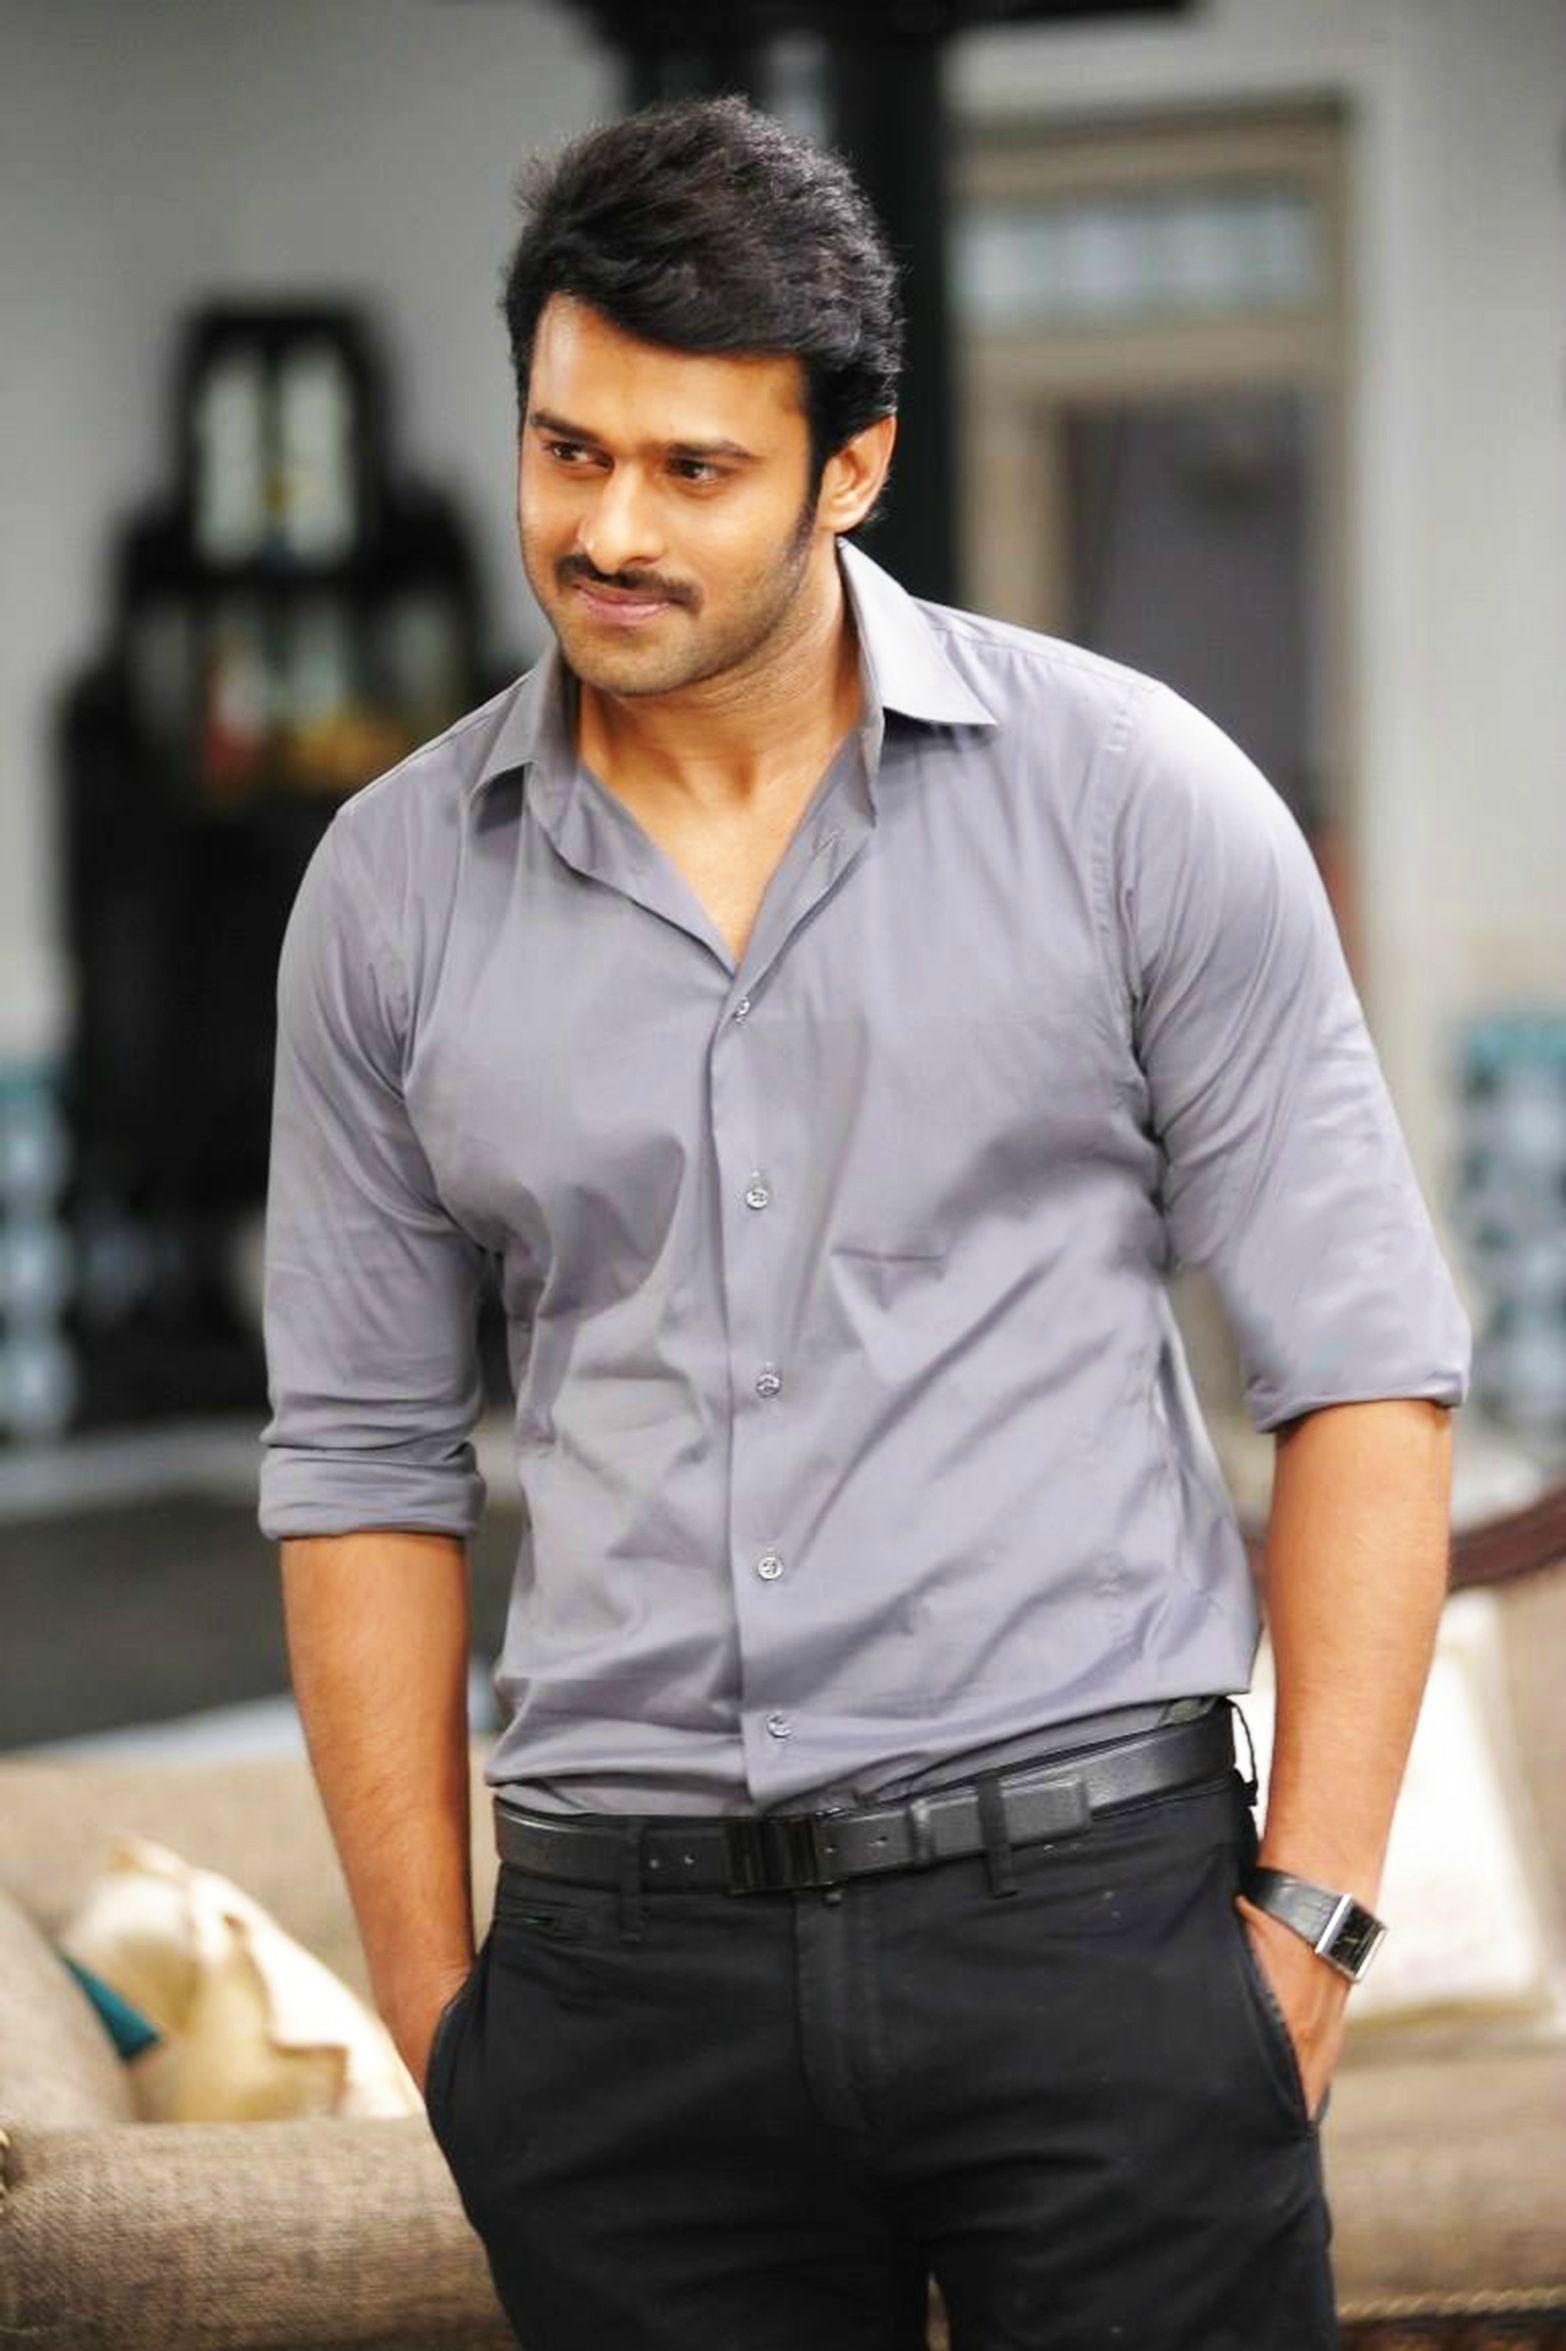 prabhas images in mirchi free download